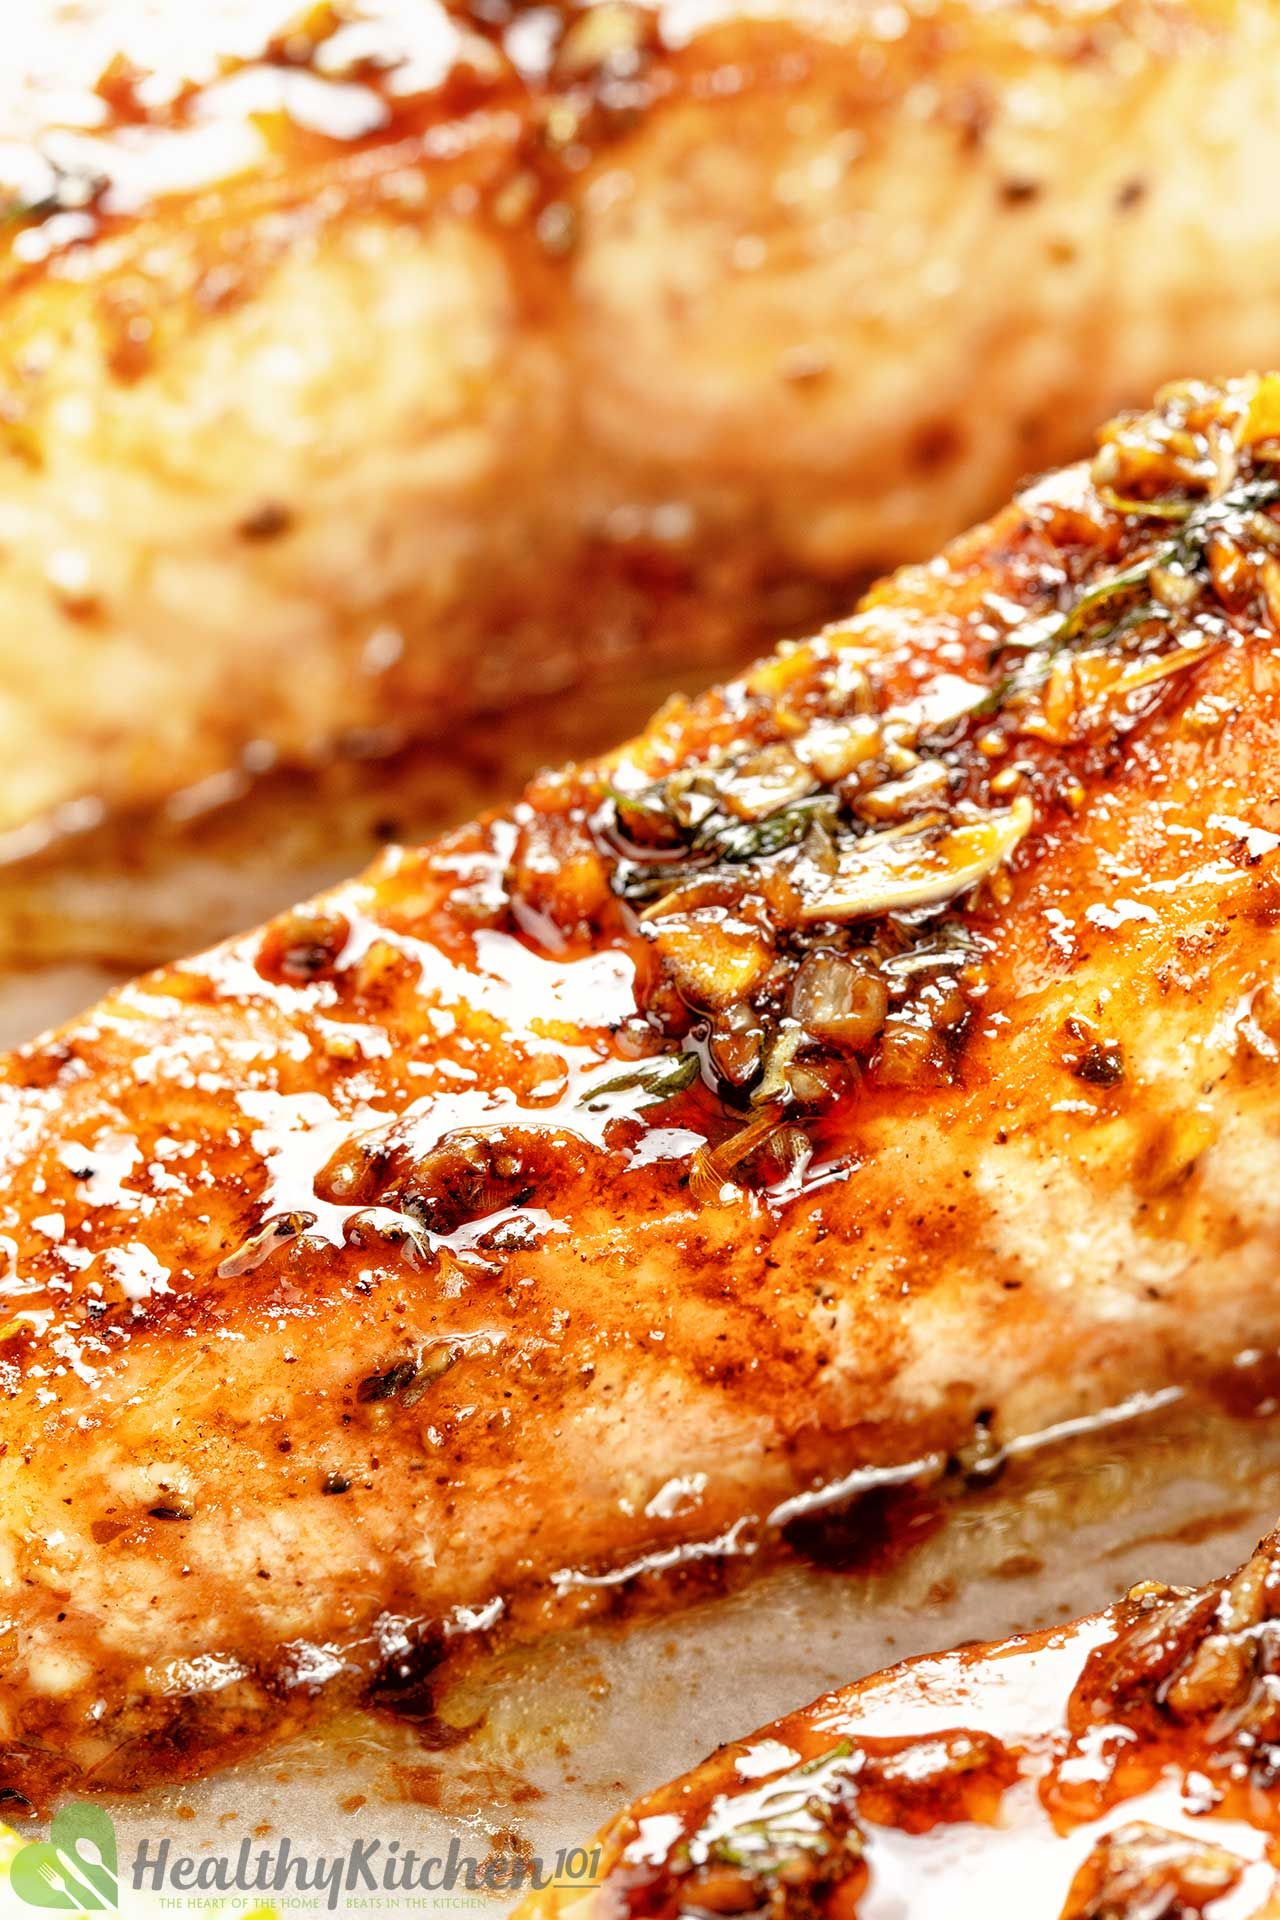 Easy Broiled Salmon Recipe